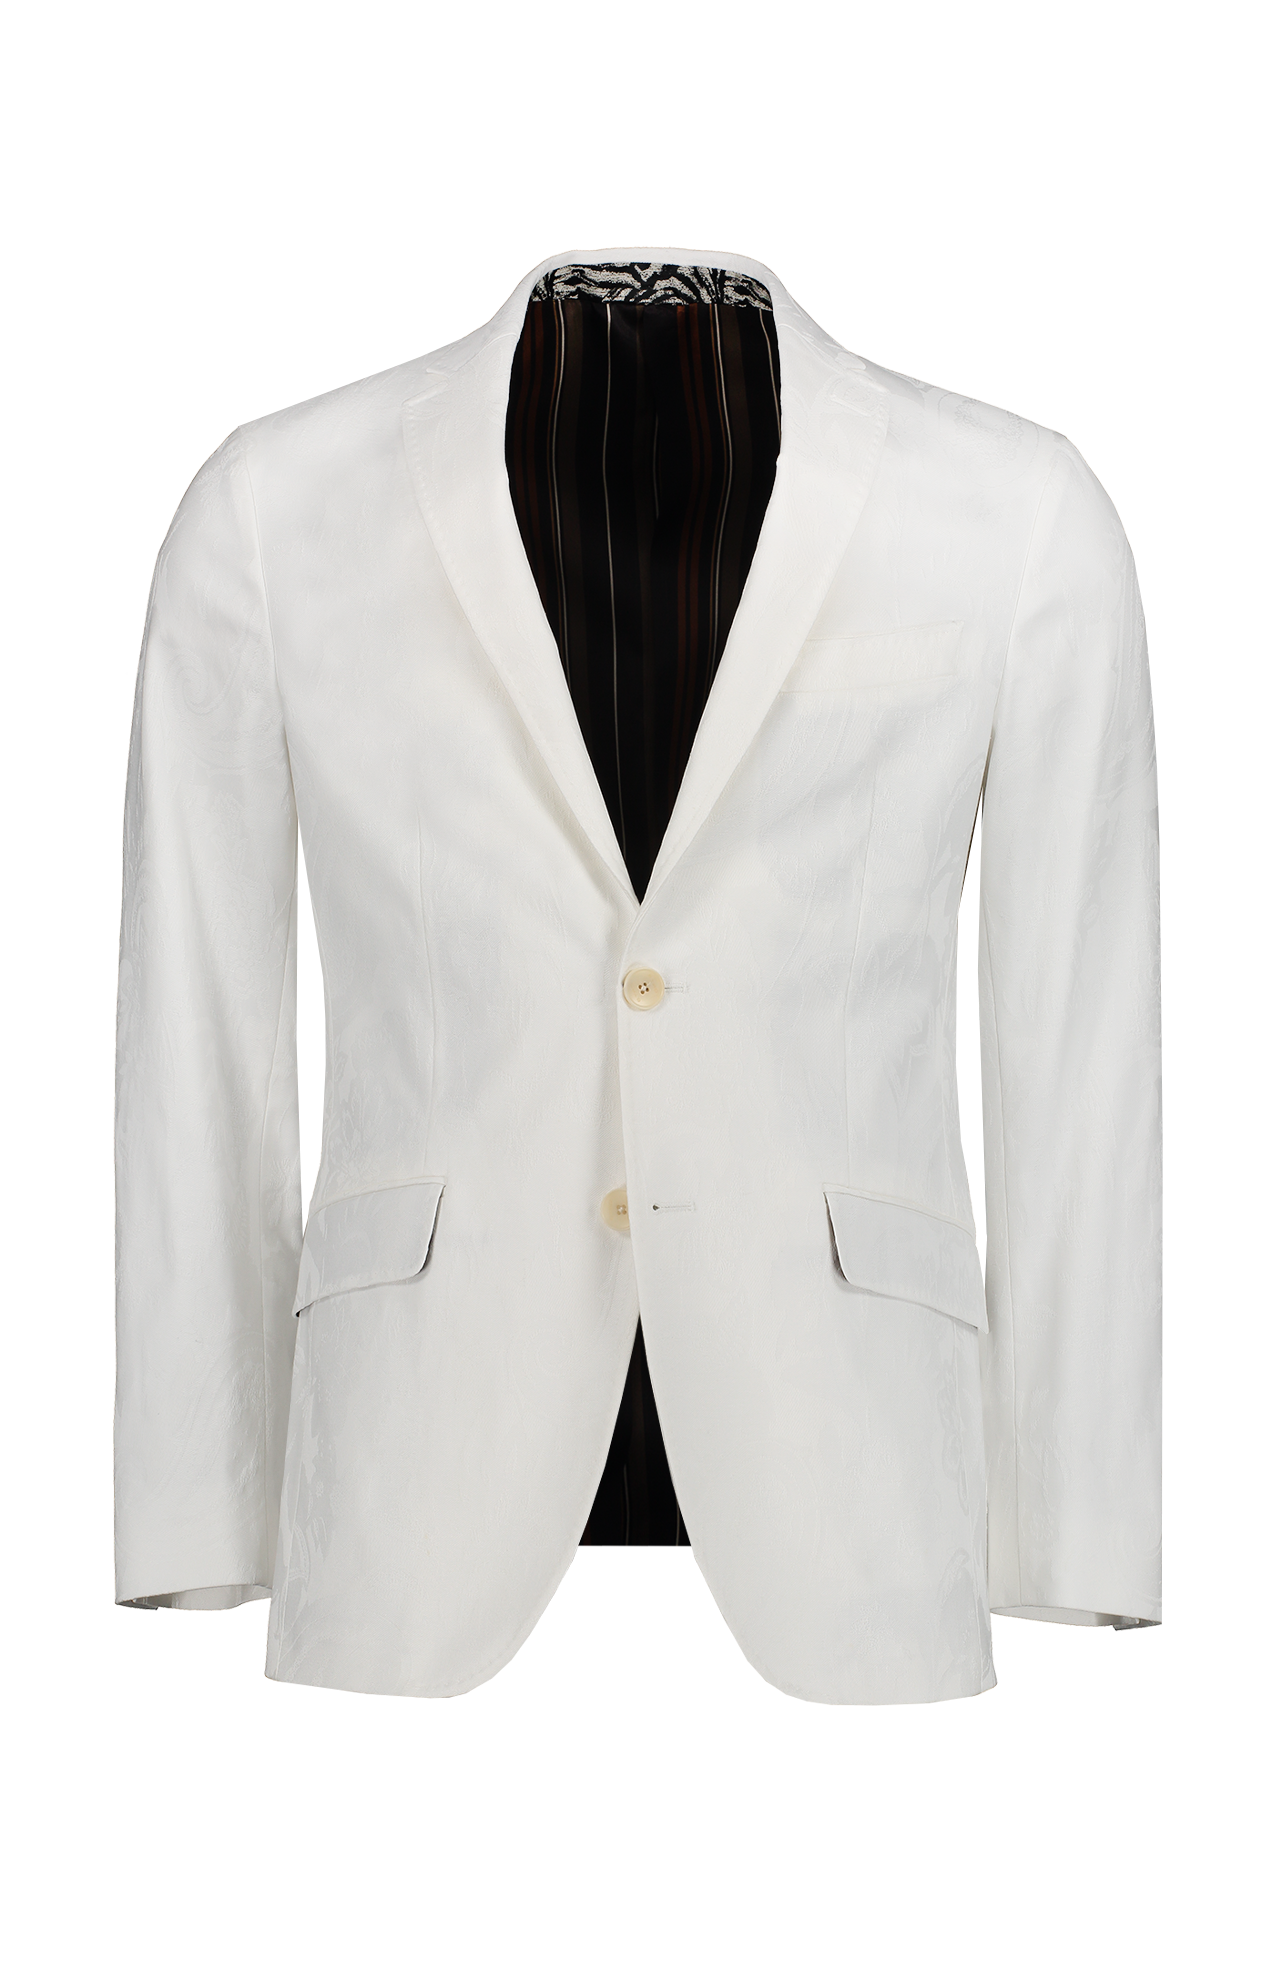 Etro Light Printed Sportcoat Off White Front Mannequin Image (7032370135155)